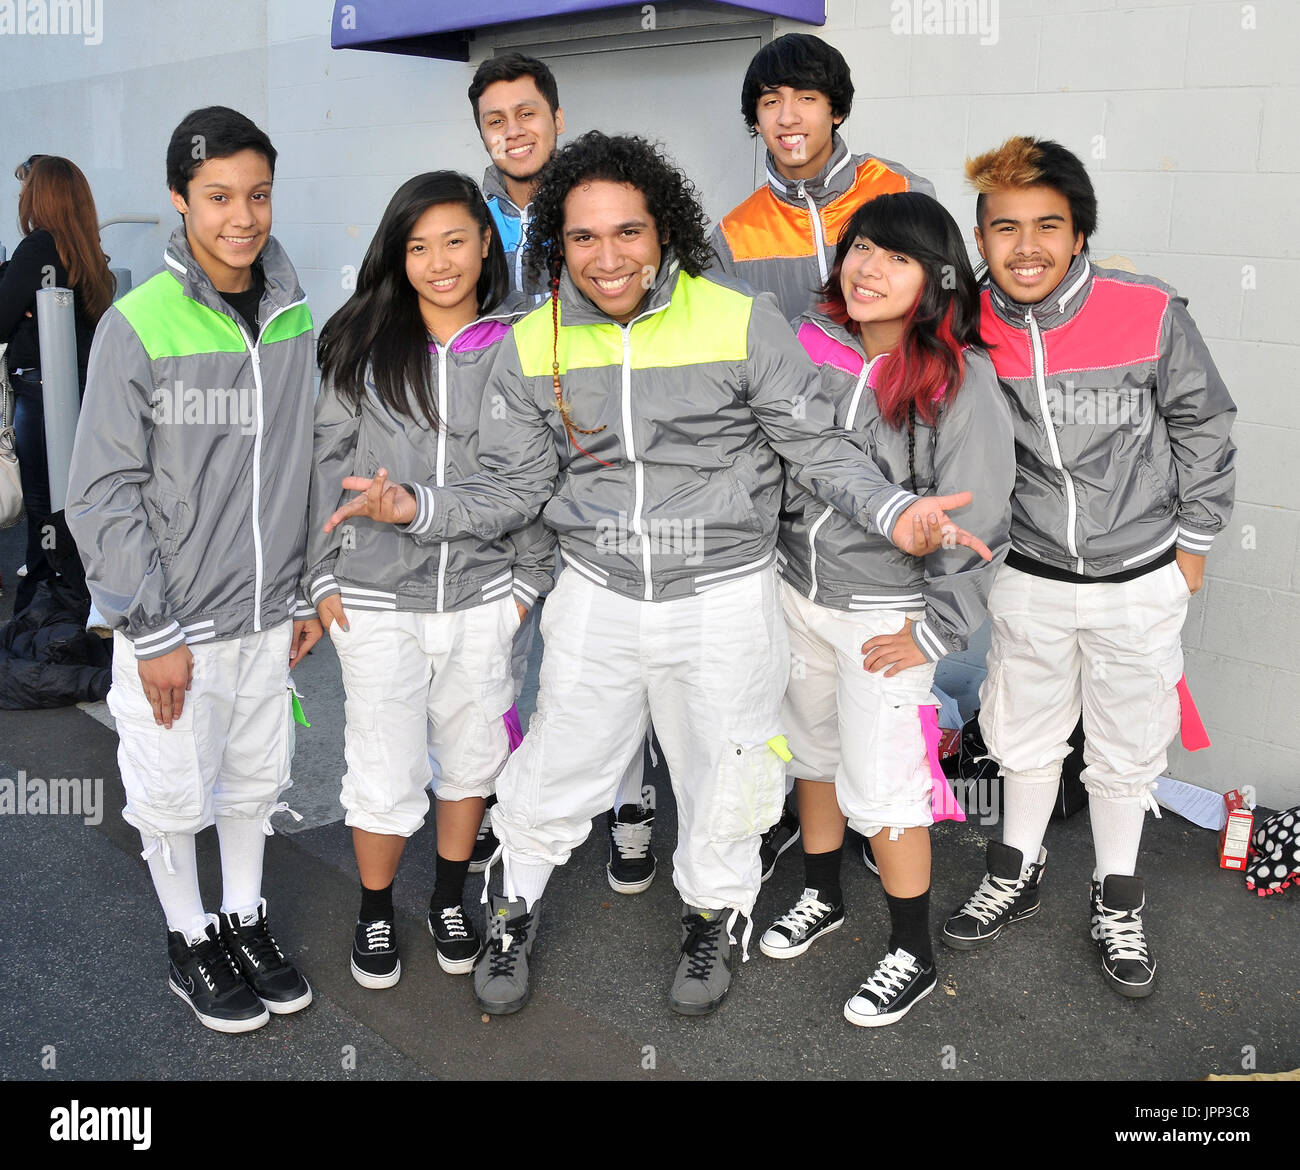 Neon at Randy Jackson's America's Best Dance Crew Season 7 Season Of The Superstars - Los Angeles Auditions at Center Staging in Burbank, CA. The event took place on Saturday, January 28, 2012. Photo by Sthanlee B. Mirador Pacific Rim Photo Press. Stock Photo